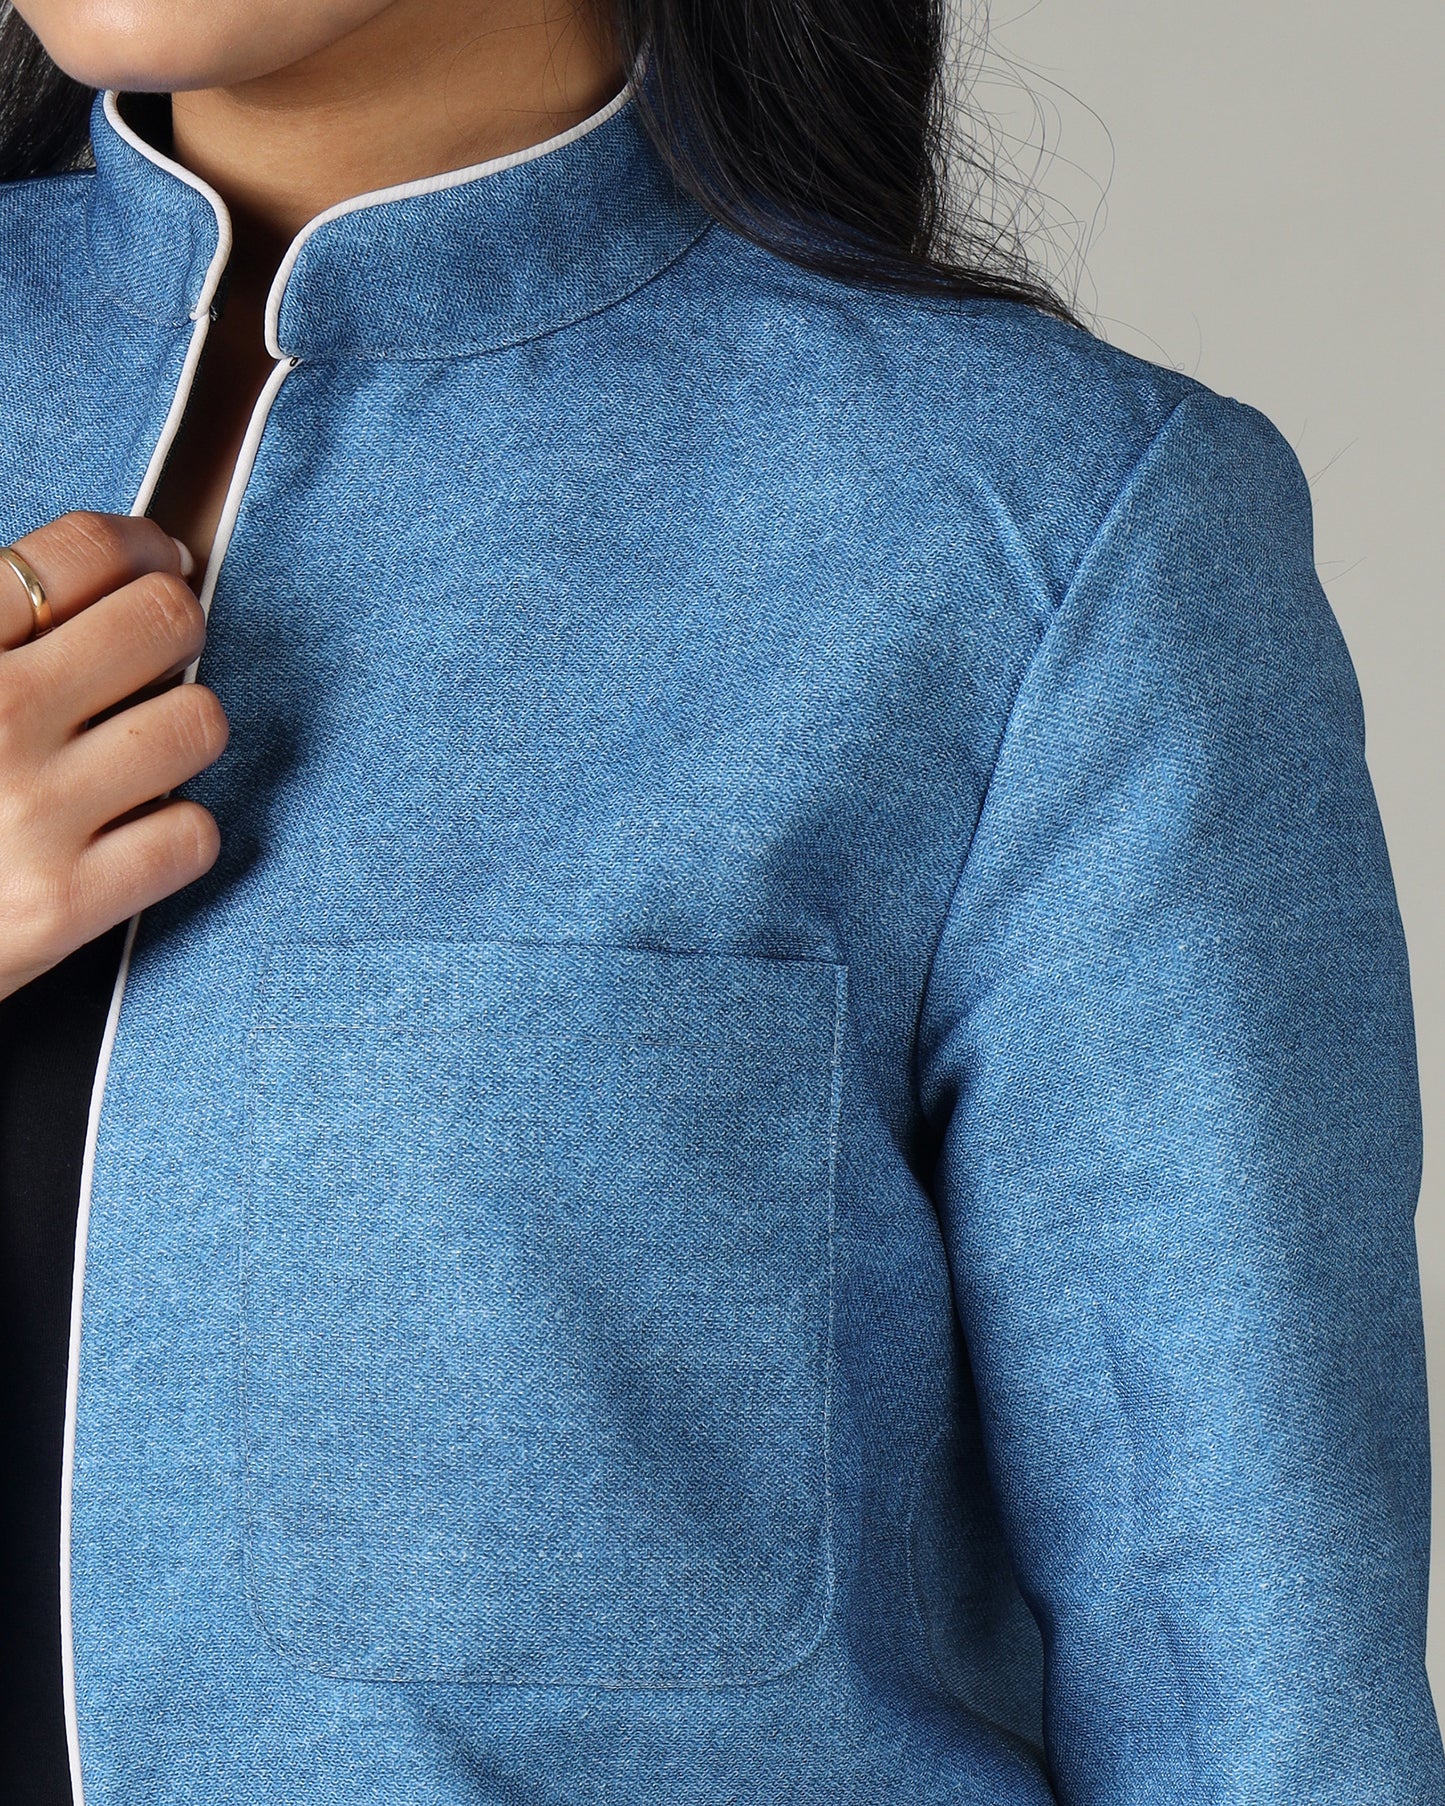 Slay the Streets in Our Denim-Inspired Women's Jacket